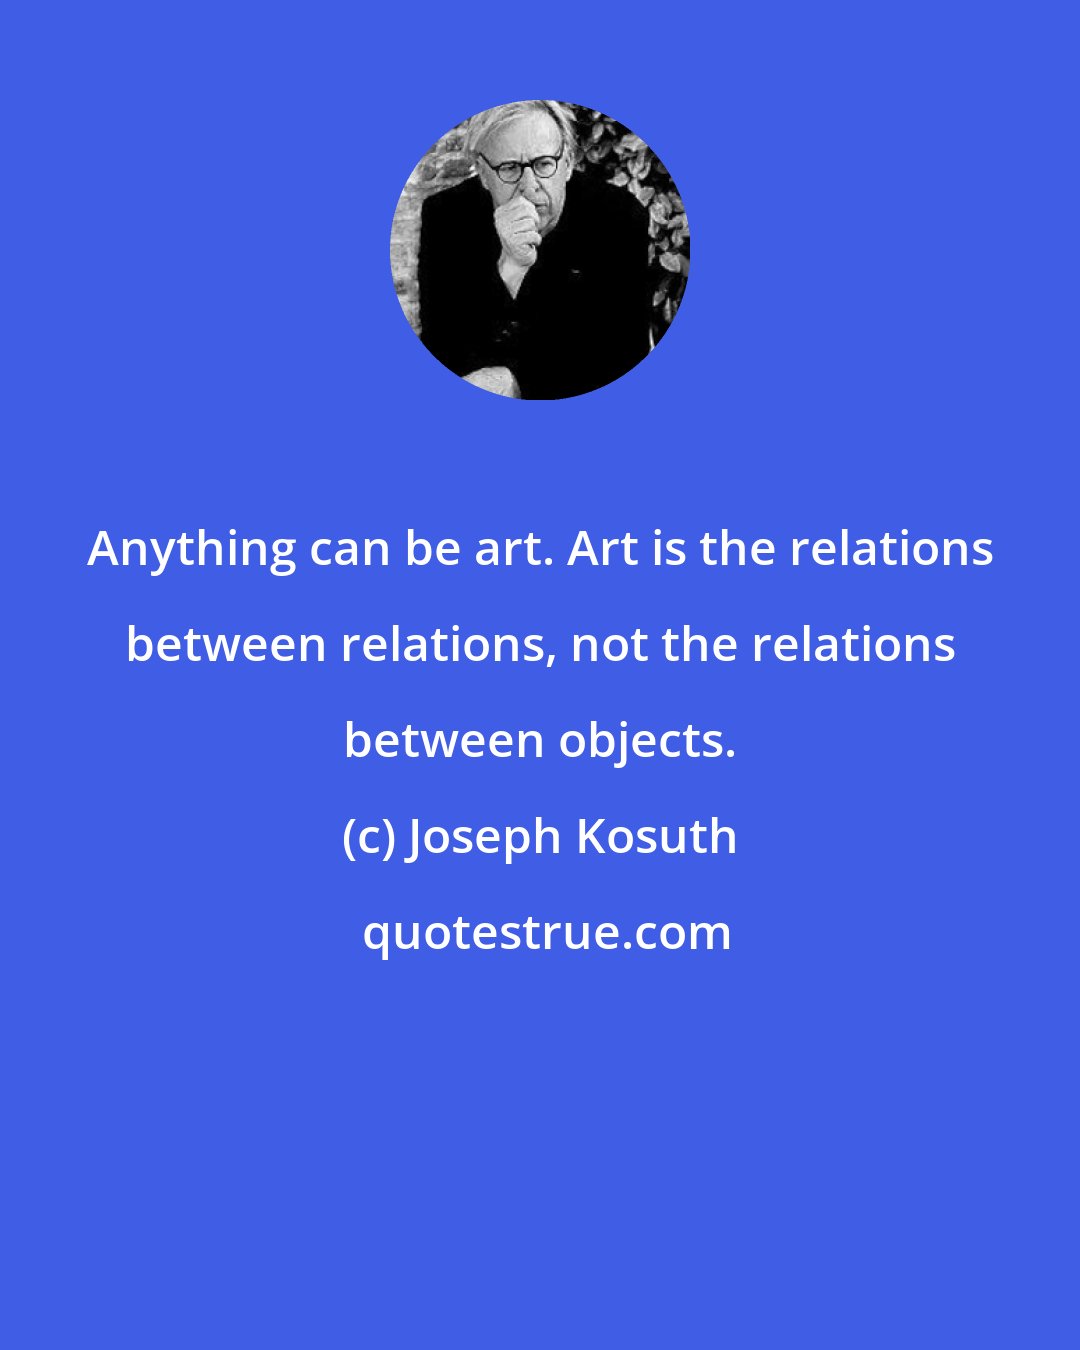 Joseph Kosuth: Anything can be art. Art is the relations between relations, not the relations between objects.